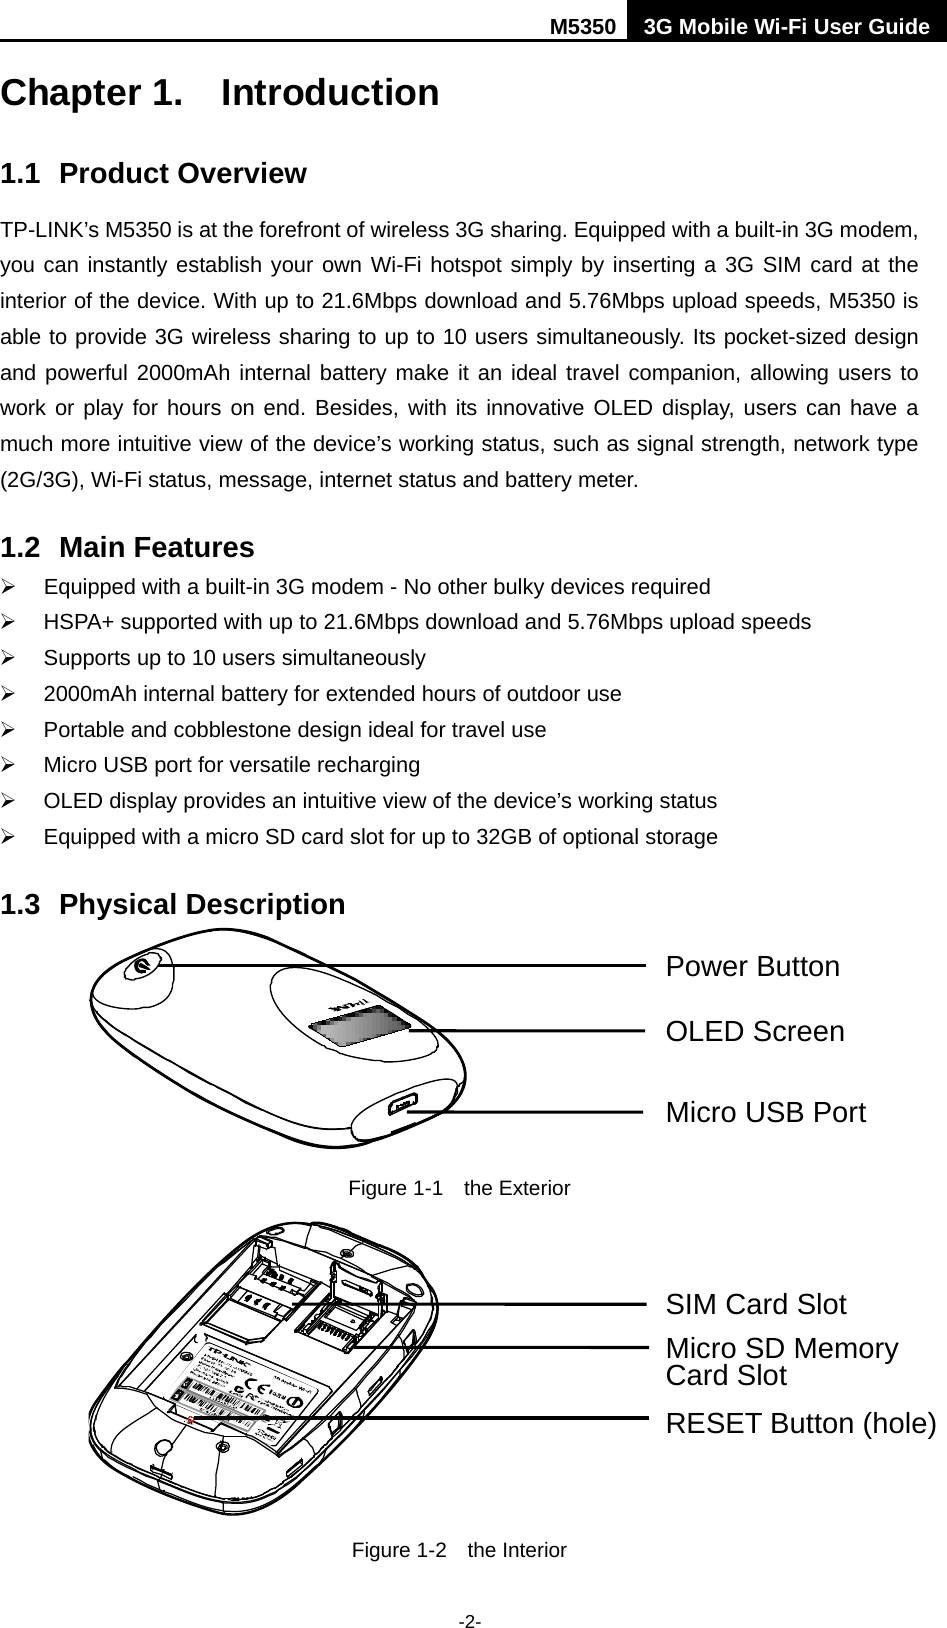 M5350 3G Mobile Wi-Fi User Guide  -2- Chapter 1. Introduction   1.1 Product Overview TP-LINK’s M5350 is at the forefront of wireless 3G sharing. Equipped with a built-in 3G modem, you can instantly establish your own Wi-Fi hotspot simply by inserting a 3G SIM card at the interior of the device. With up to 21.6Mbps download and 5.76Mbps upload speeds, M5350 is able to provide 3G wireless sharing to up to 10 users simultaneously. Its pocket-sized design and powerful 2000mAh internal battery make it an ideal travel companion, allowing users to work or play for hours on end. Besides, with its innovative OLED display, users can have a much more intuitive view of the device’s working status, such as signal strength, network type (2G/3G), Wi-Fi status, message, internet status and battery meter. 1.2 Main Features  Equipped with a built-in 3G modem - No other bulky devices required  HSPA+ supported with up to 21.6Mbps download and 5.76Mbps upload speeds  Supports up to 10 users simultaneously  2000mAh internal battery for extended hours of outdoor use  Portable and cobblestone design ideal for travel use  Micro USB port for versatile recharging  OLED display provides an intuitive view of the device’s working status  Equipped with a micro SD card slot for up to 32GB of optional storage 1.3 Physical Description  Figure 1-1  the Exterior  Figure 1-2  the Interior Power Button OLED Screen Micro USB Port SIM Card Slot Micro SD Memory   Card Slot RESET Button (hole) 